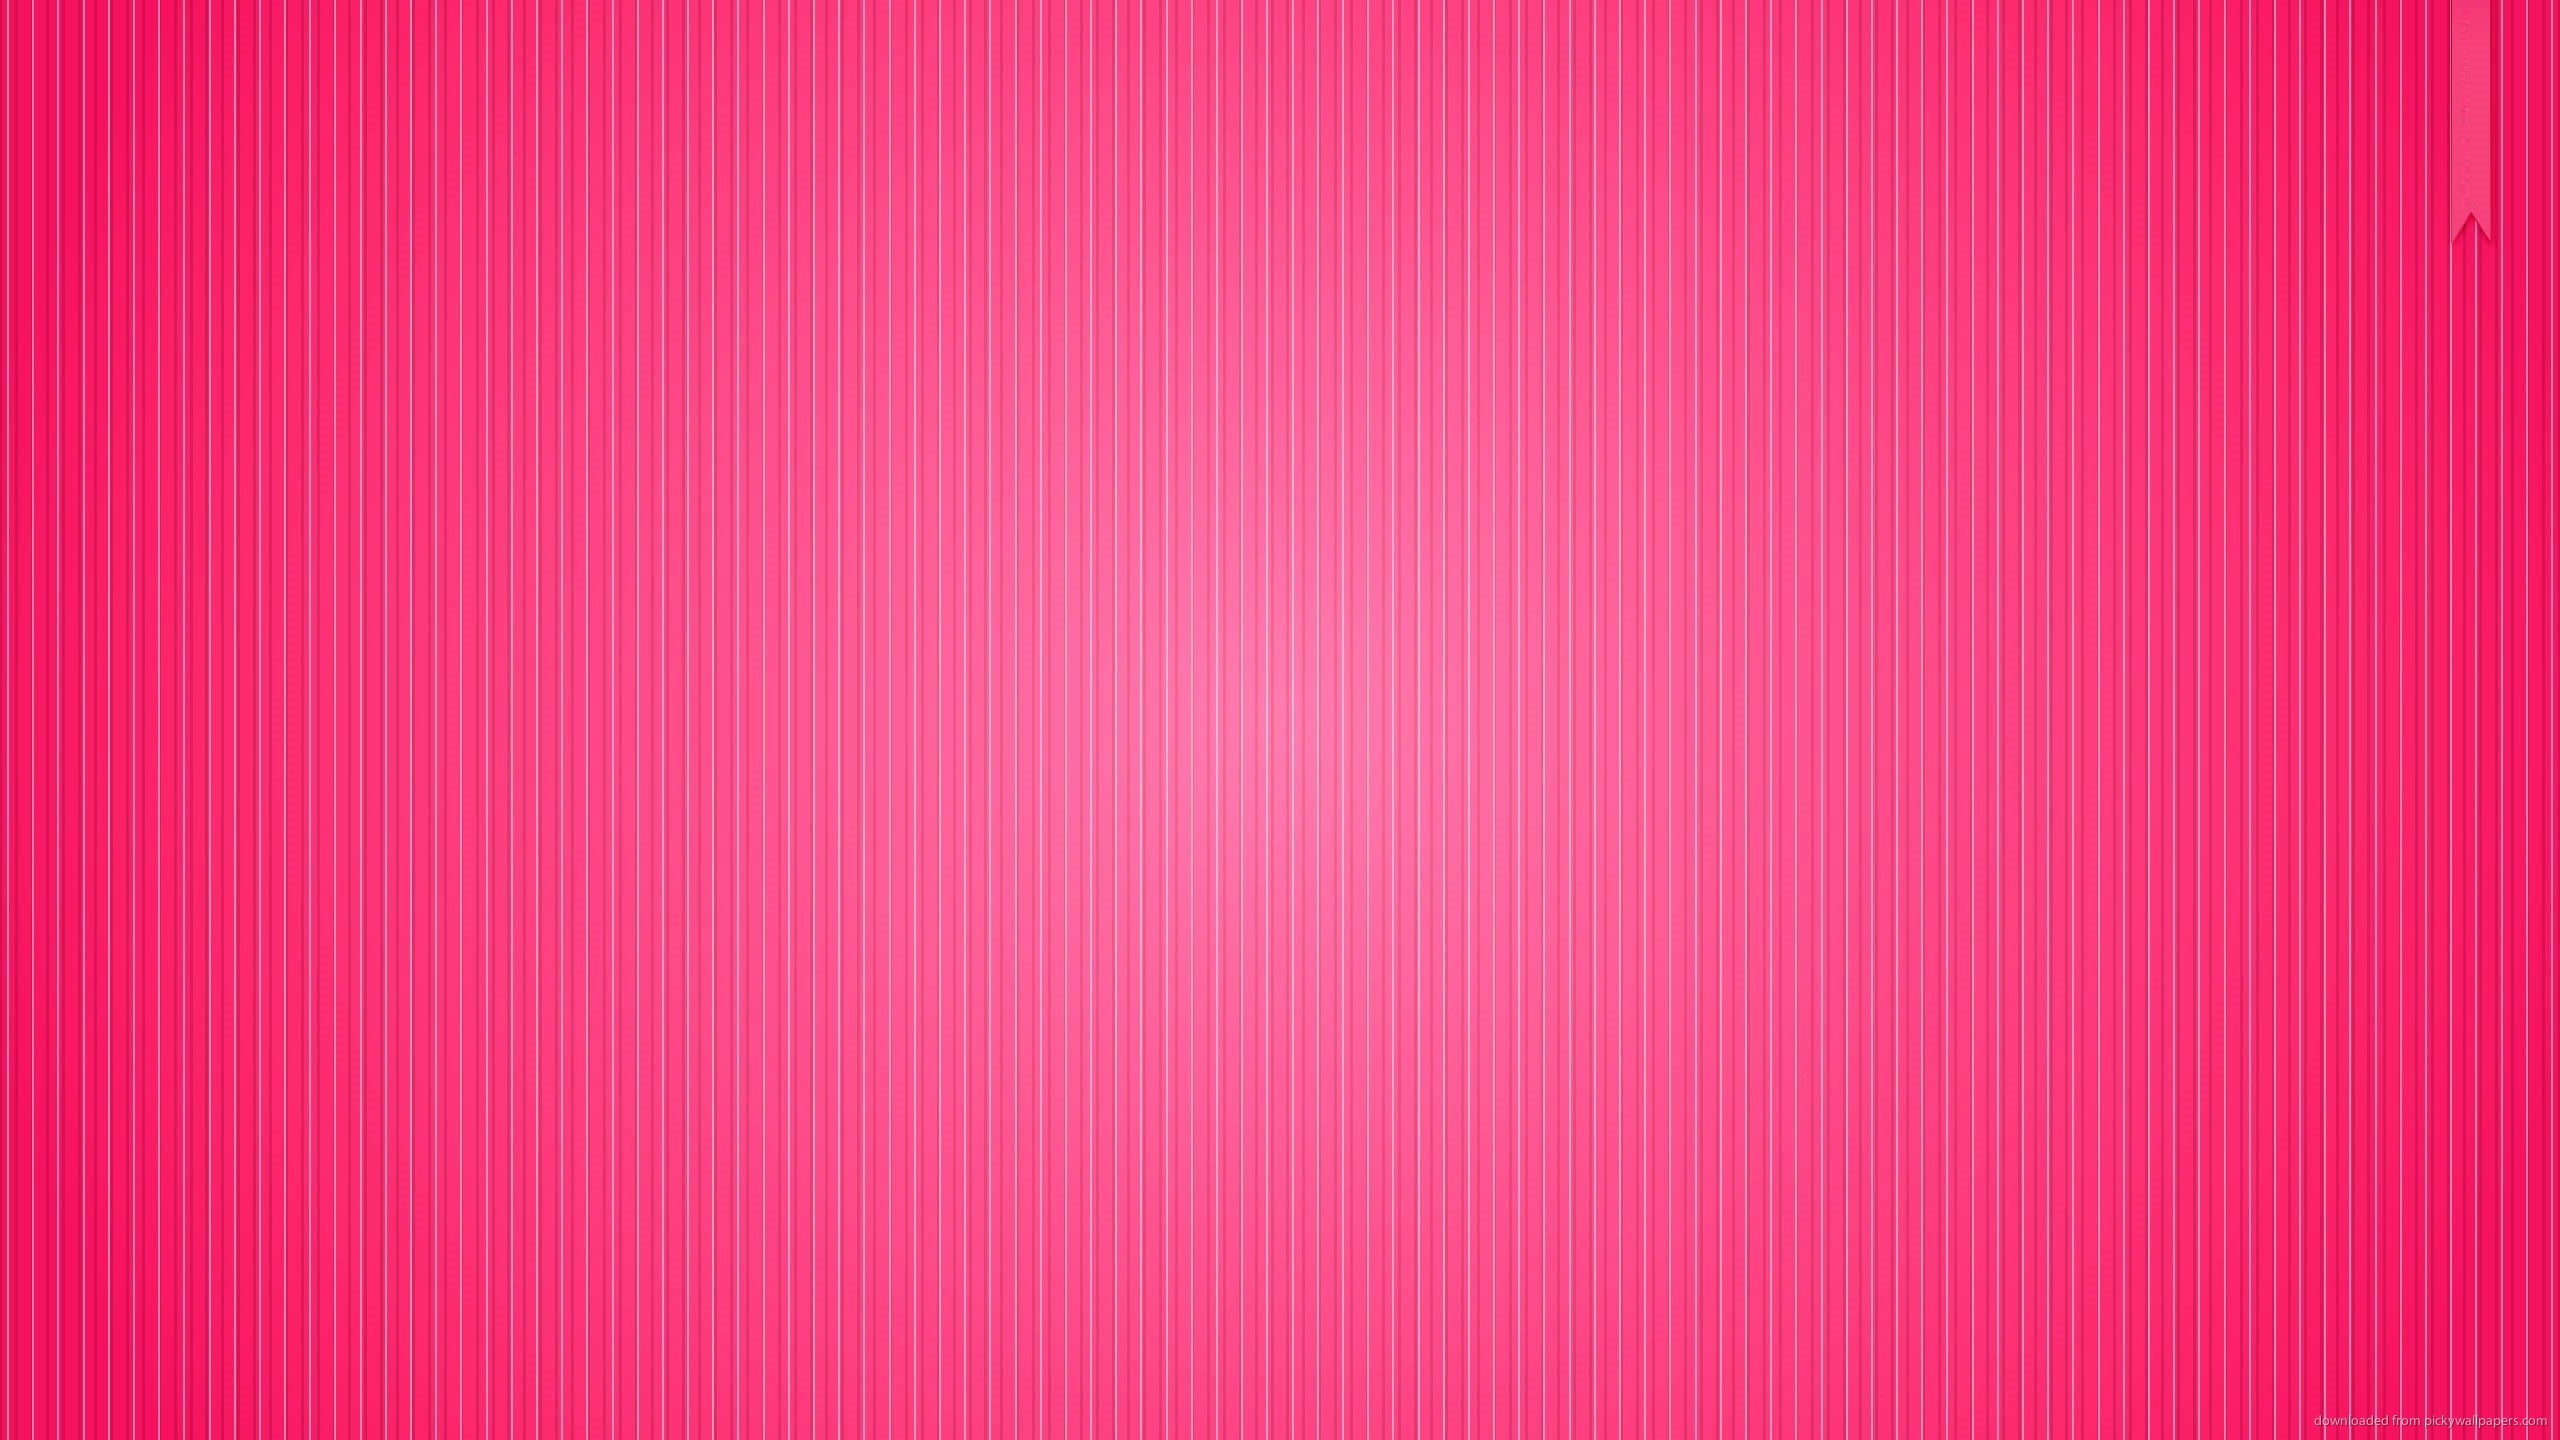 2560x1440 Valentine's Day Pink Striped Background for 